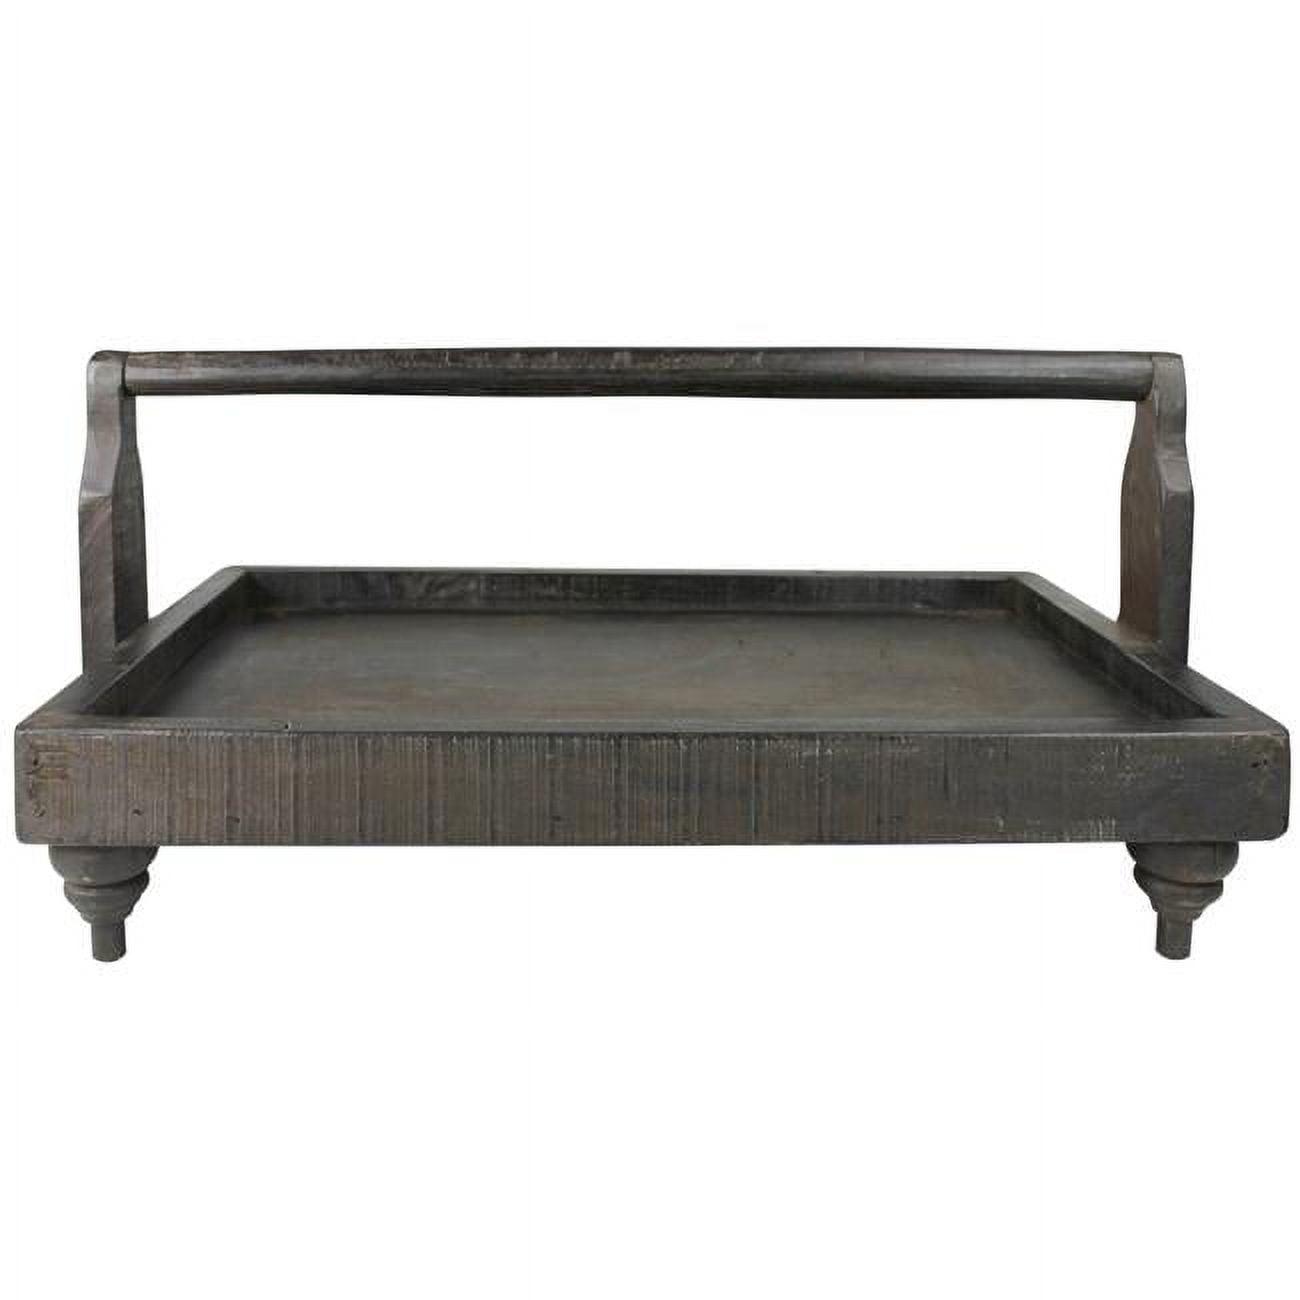 Vintage-Inspired Reclaimed Wood Serving Tray with Stout Legs